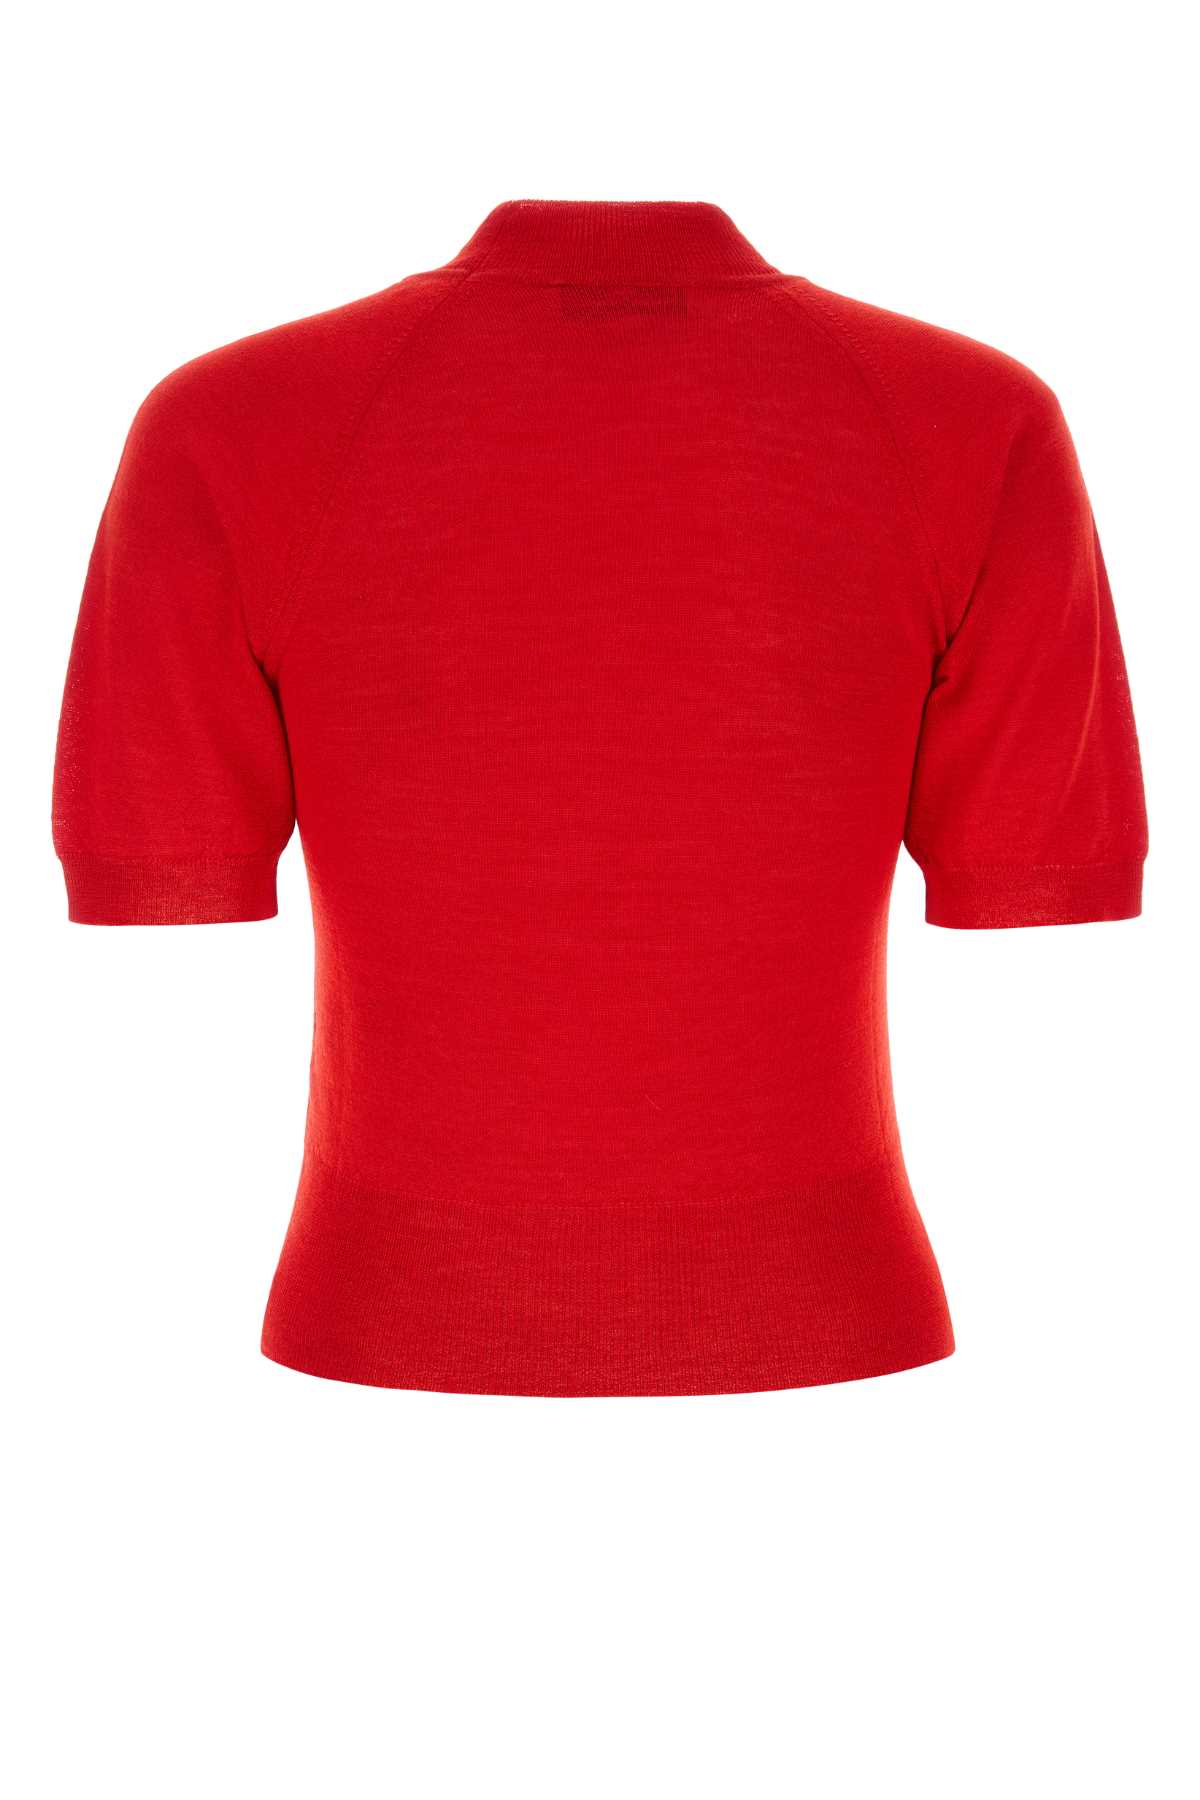 Vivienne Westwood Red Cotton Blend Bea Sweater In H401